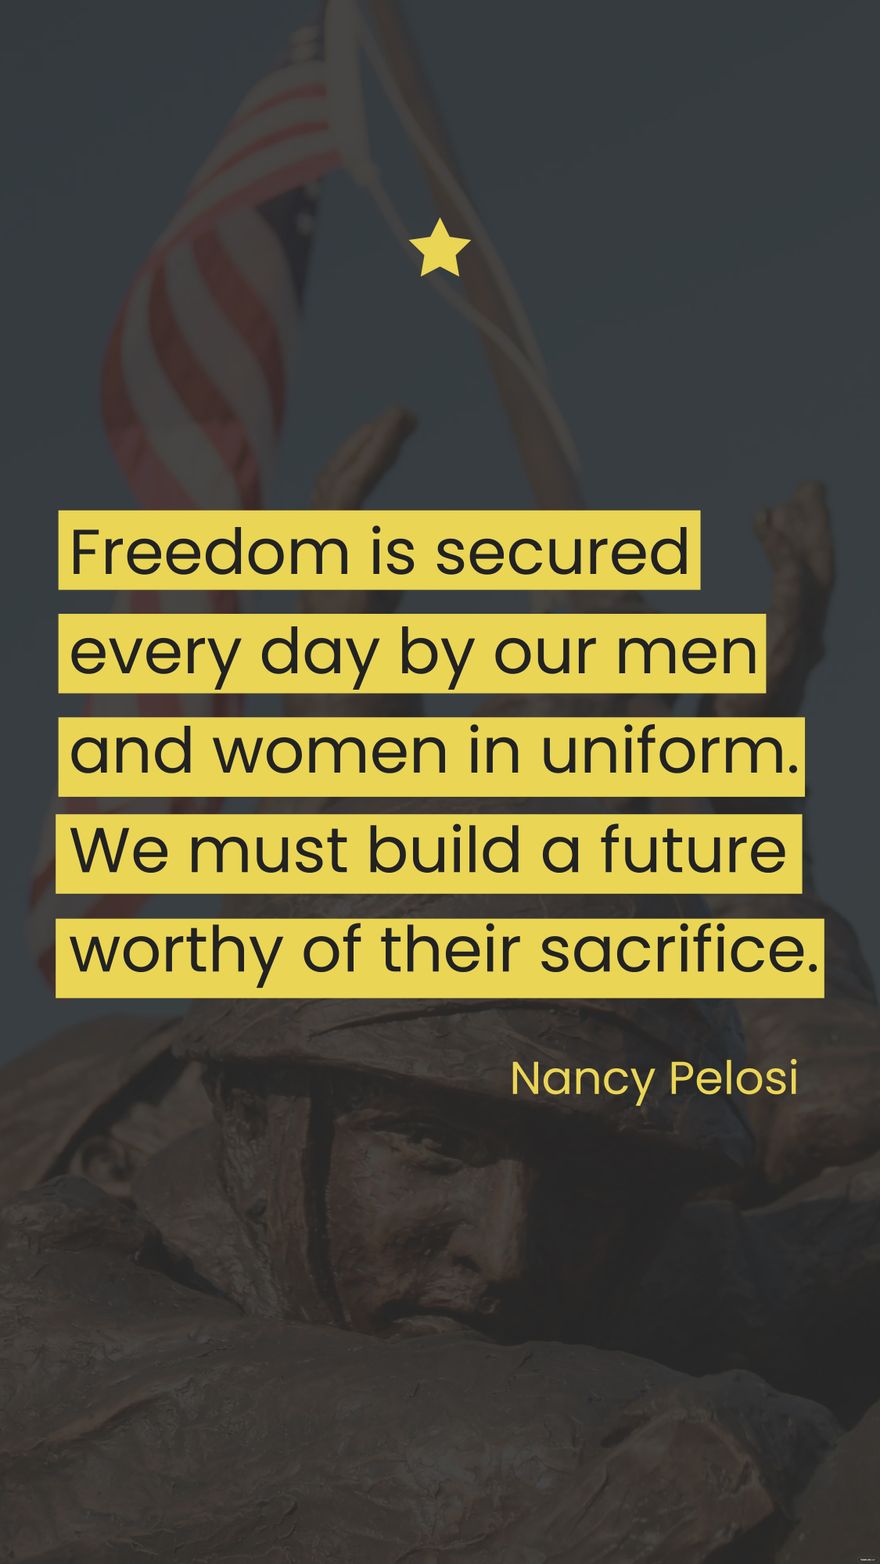 Nancy Pelosi - Freedom is secured every day by our men and women in uniform. We must build a future worthy of their sacrifice.